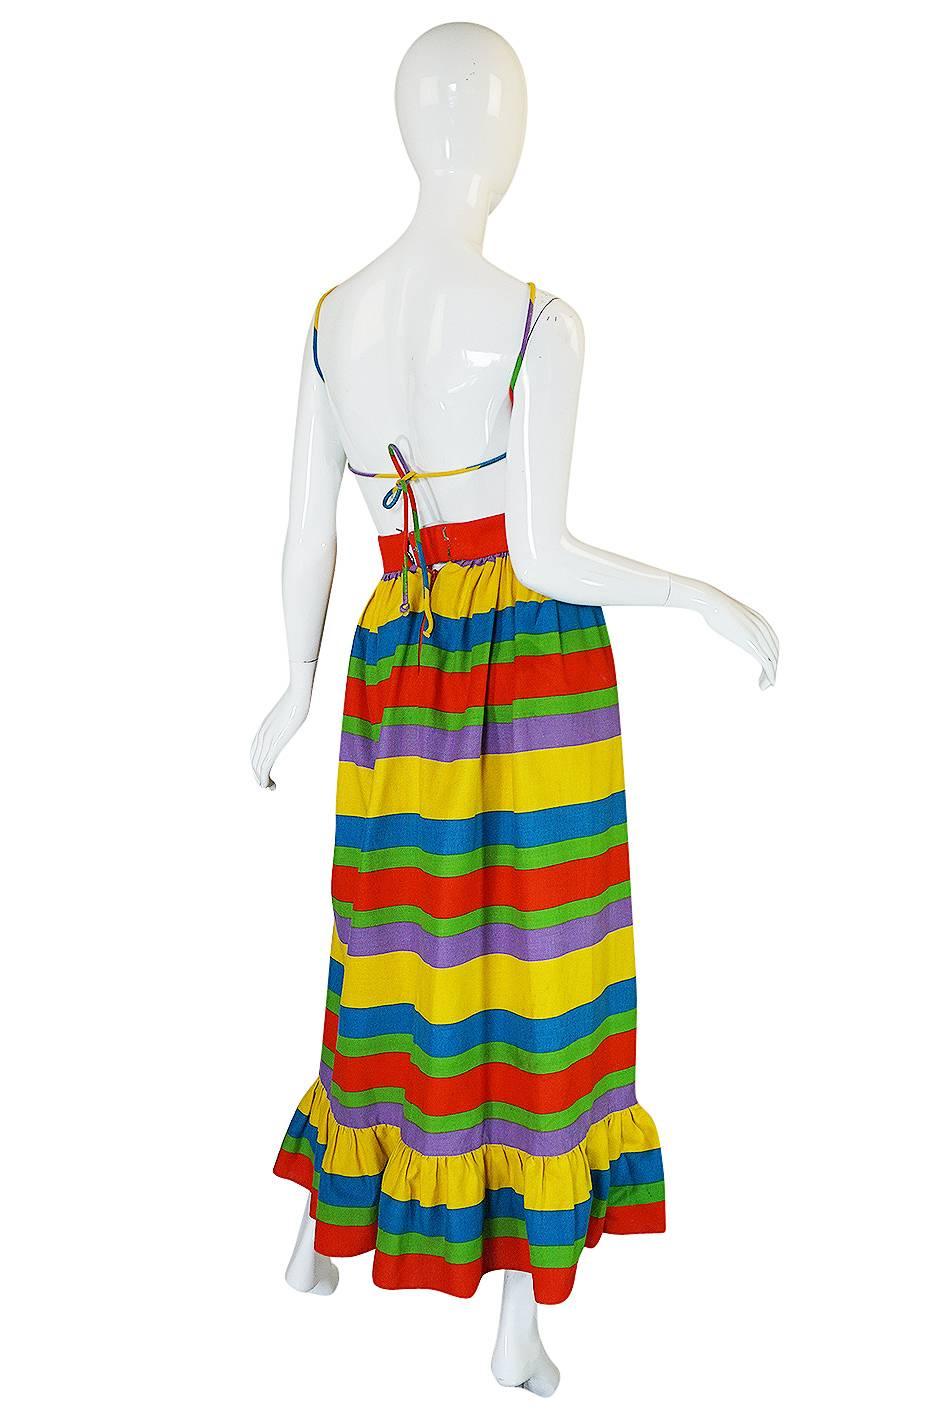 This is one of my favorite of the early Oscar designs. It is so bright and colorful that you can't help but smile in it. The cut is also extremely sexy yet it still has an innocent, girl-next-door feel to it. It is made from heavy linen that is